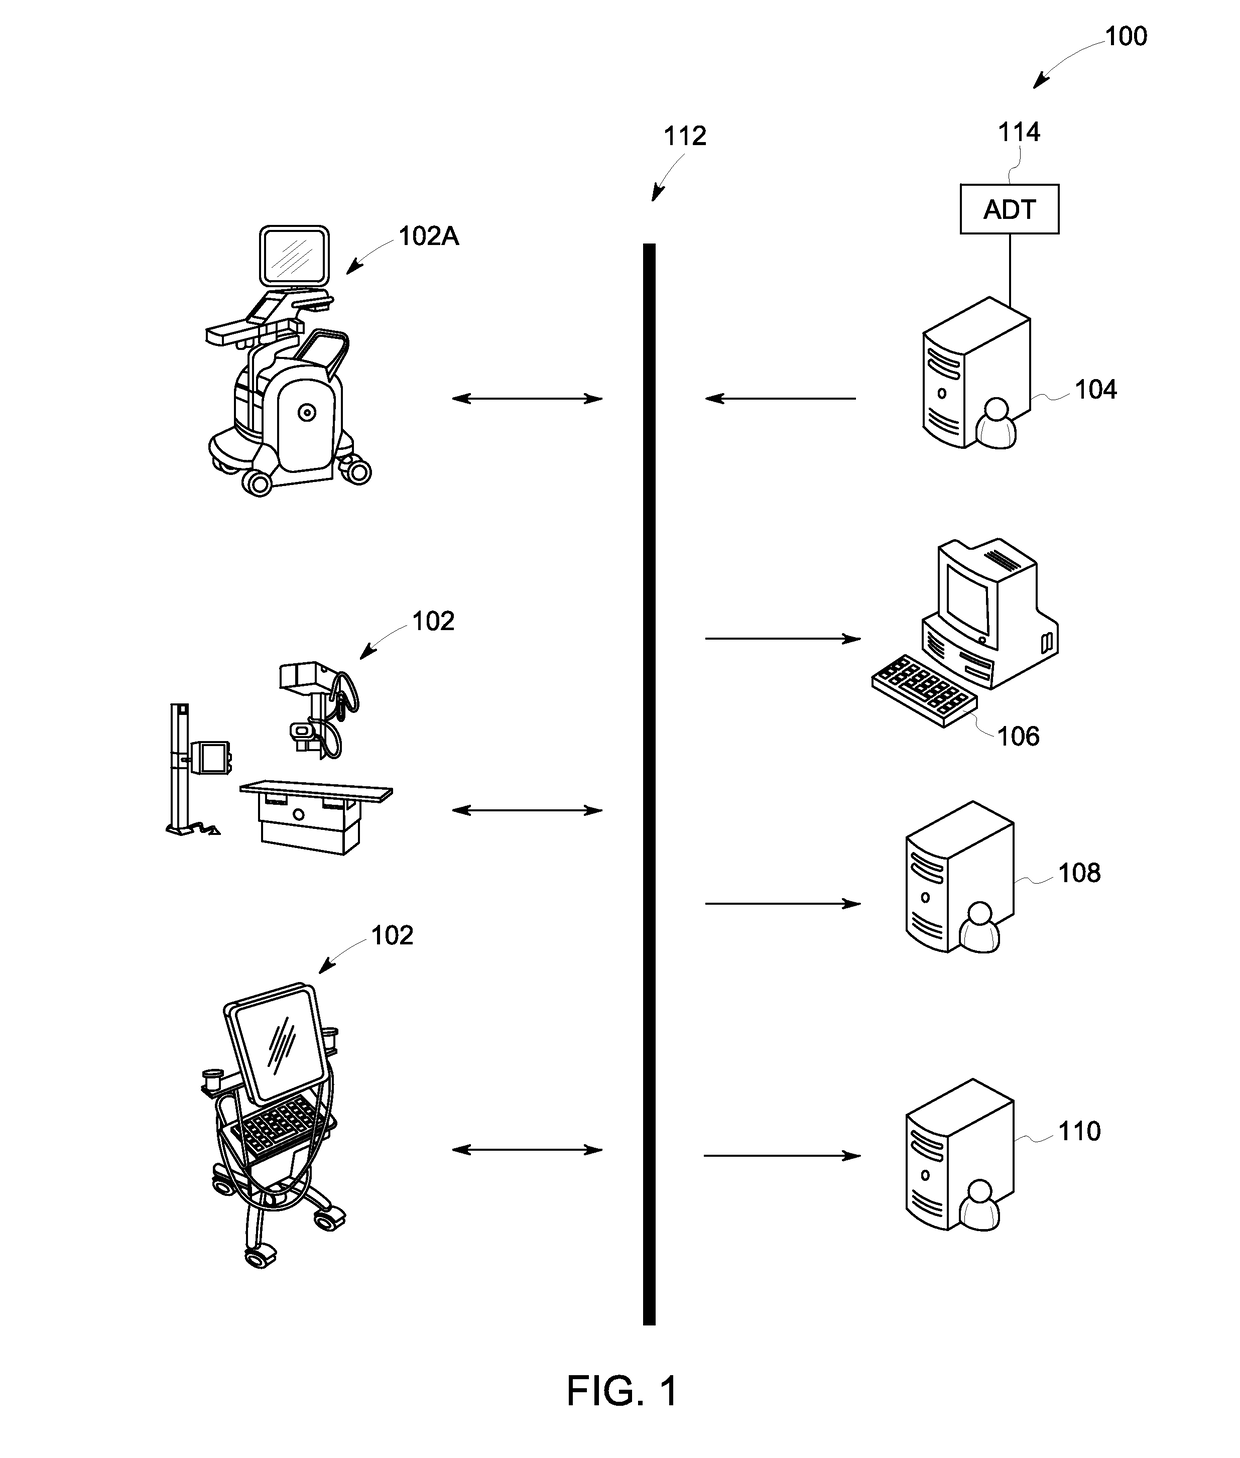 Methods and systems for managing distribution of protected information on a medical display